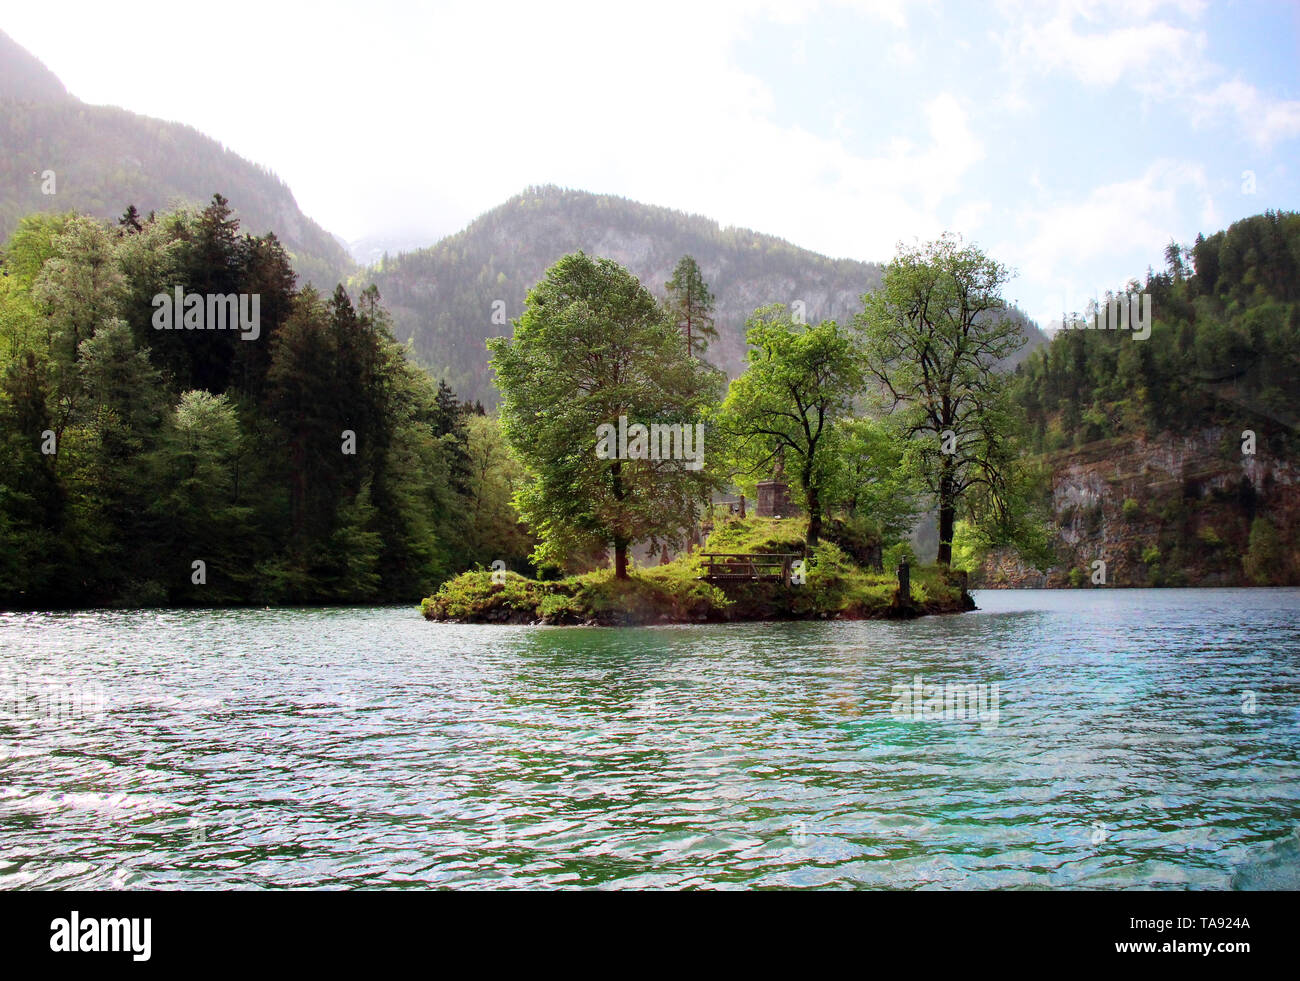 Island in the Königssee/Kings Lake in the middle of the alps of Berchtesgaden Stock Photo